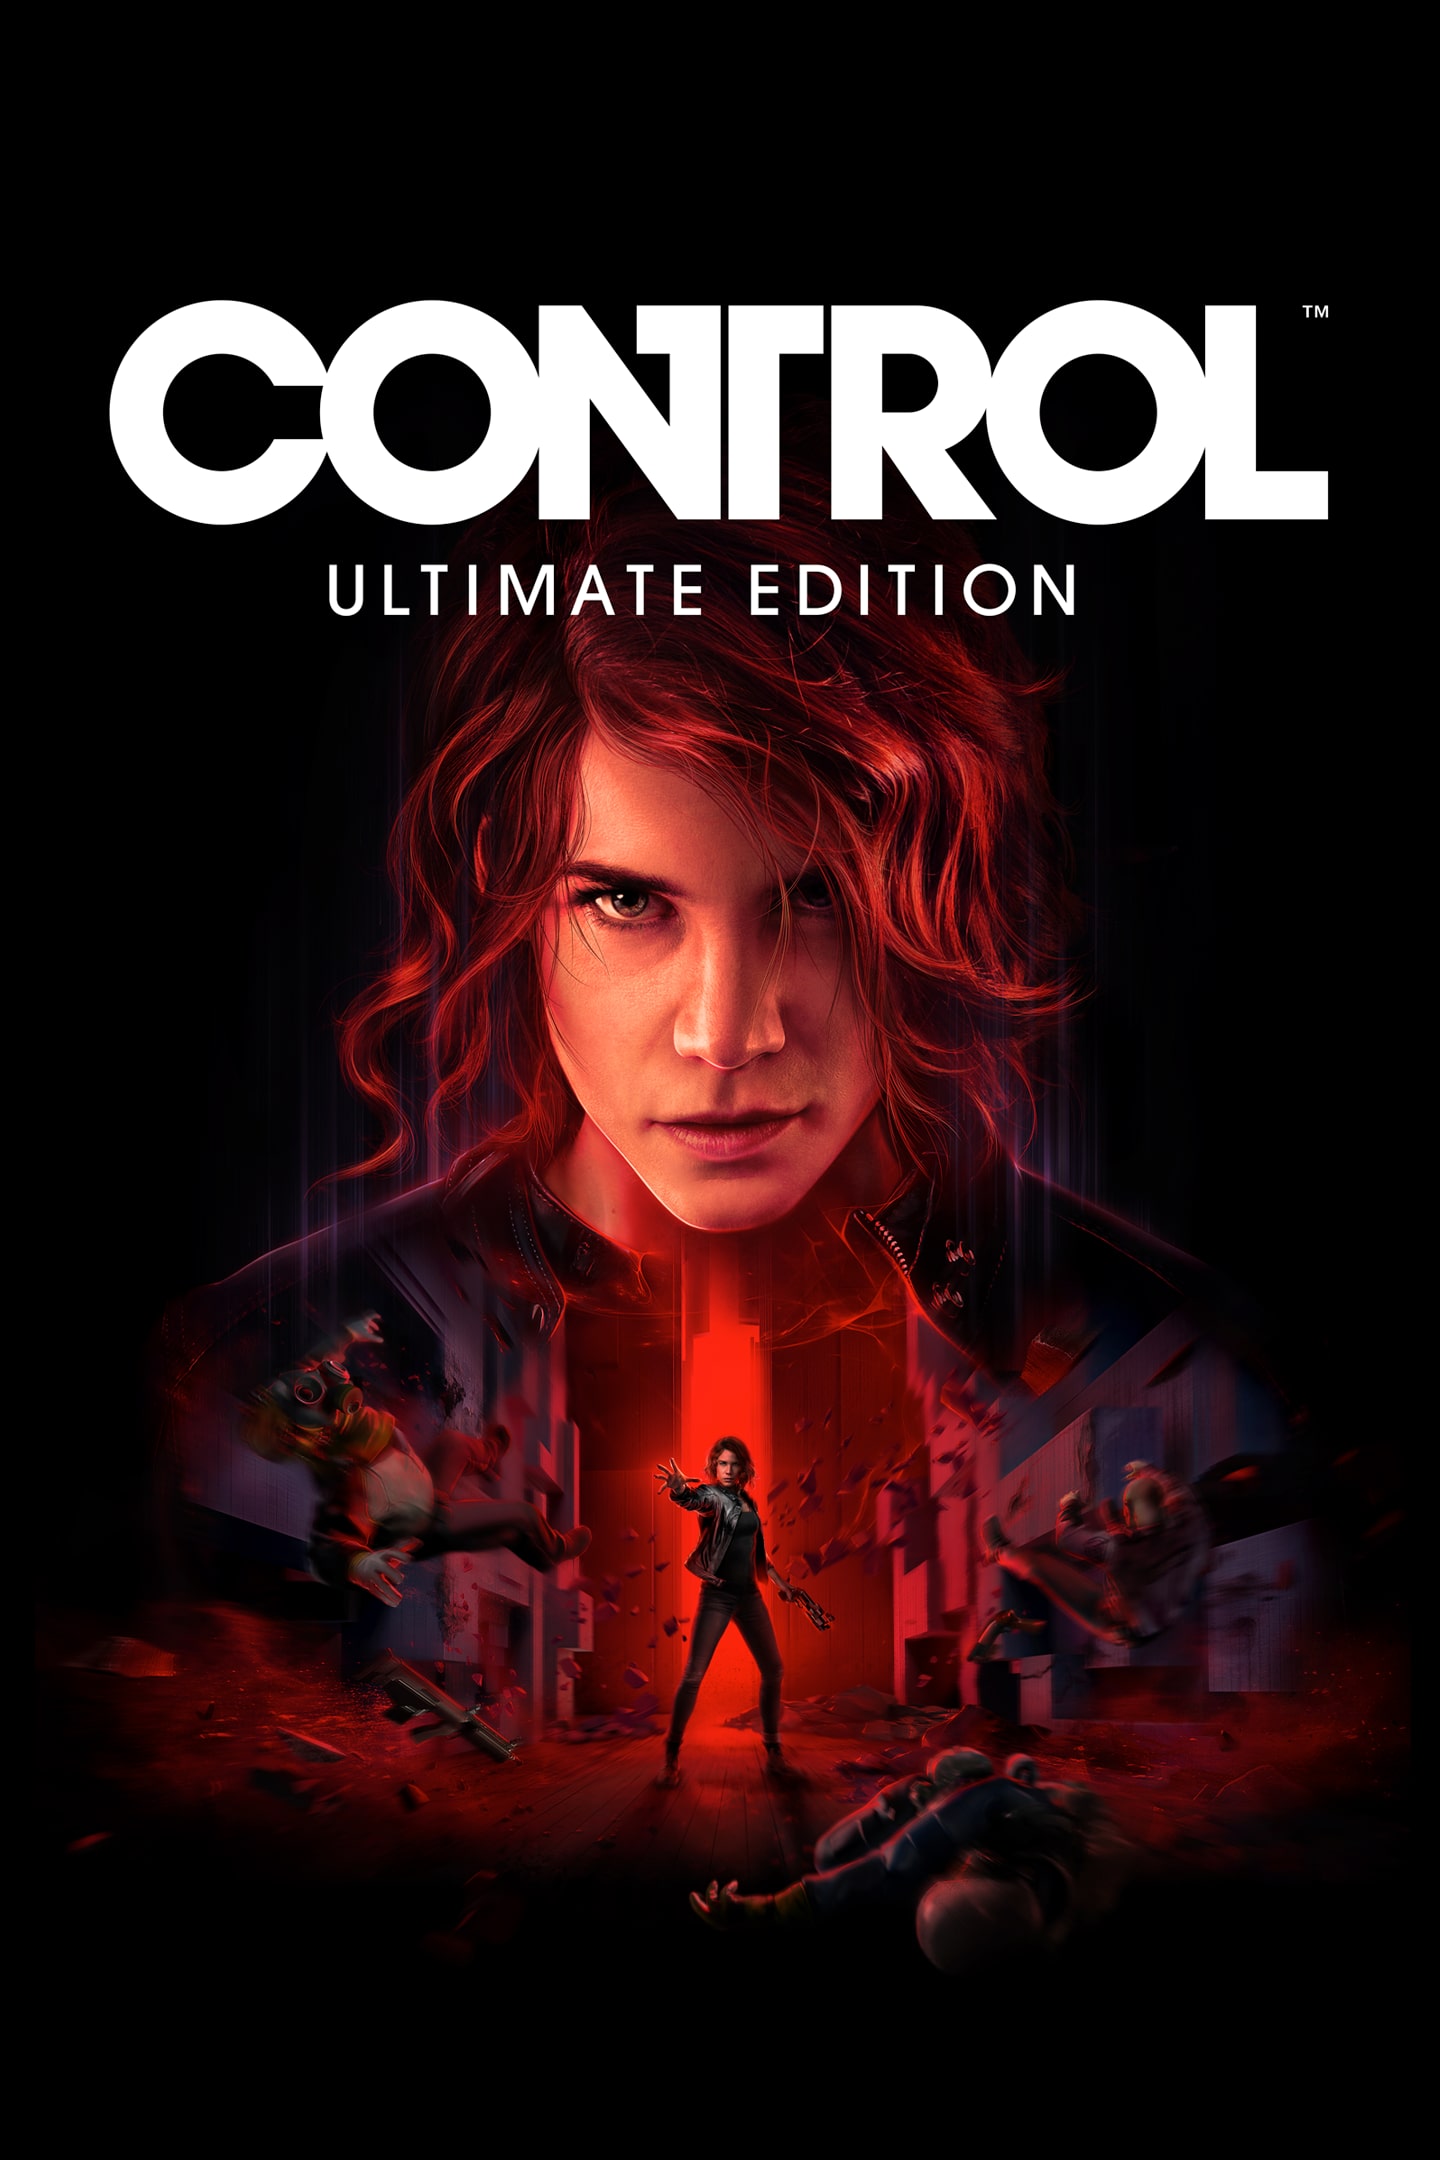 control game ps4